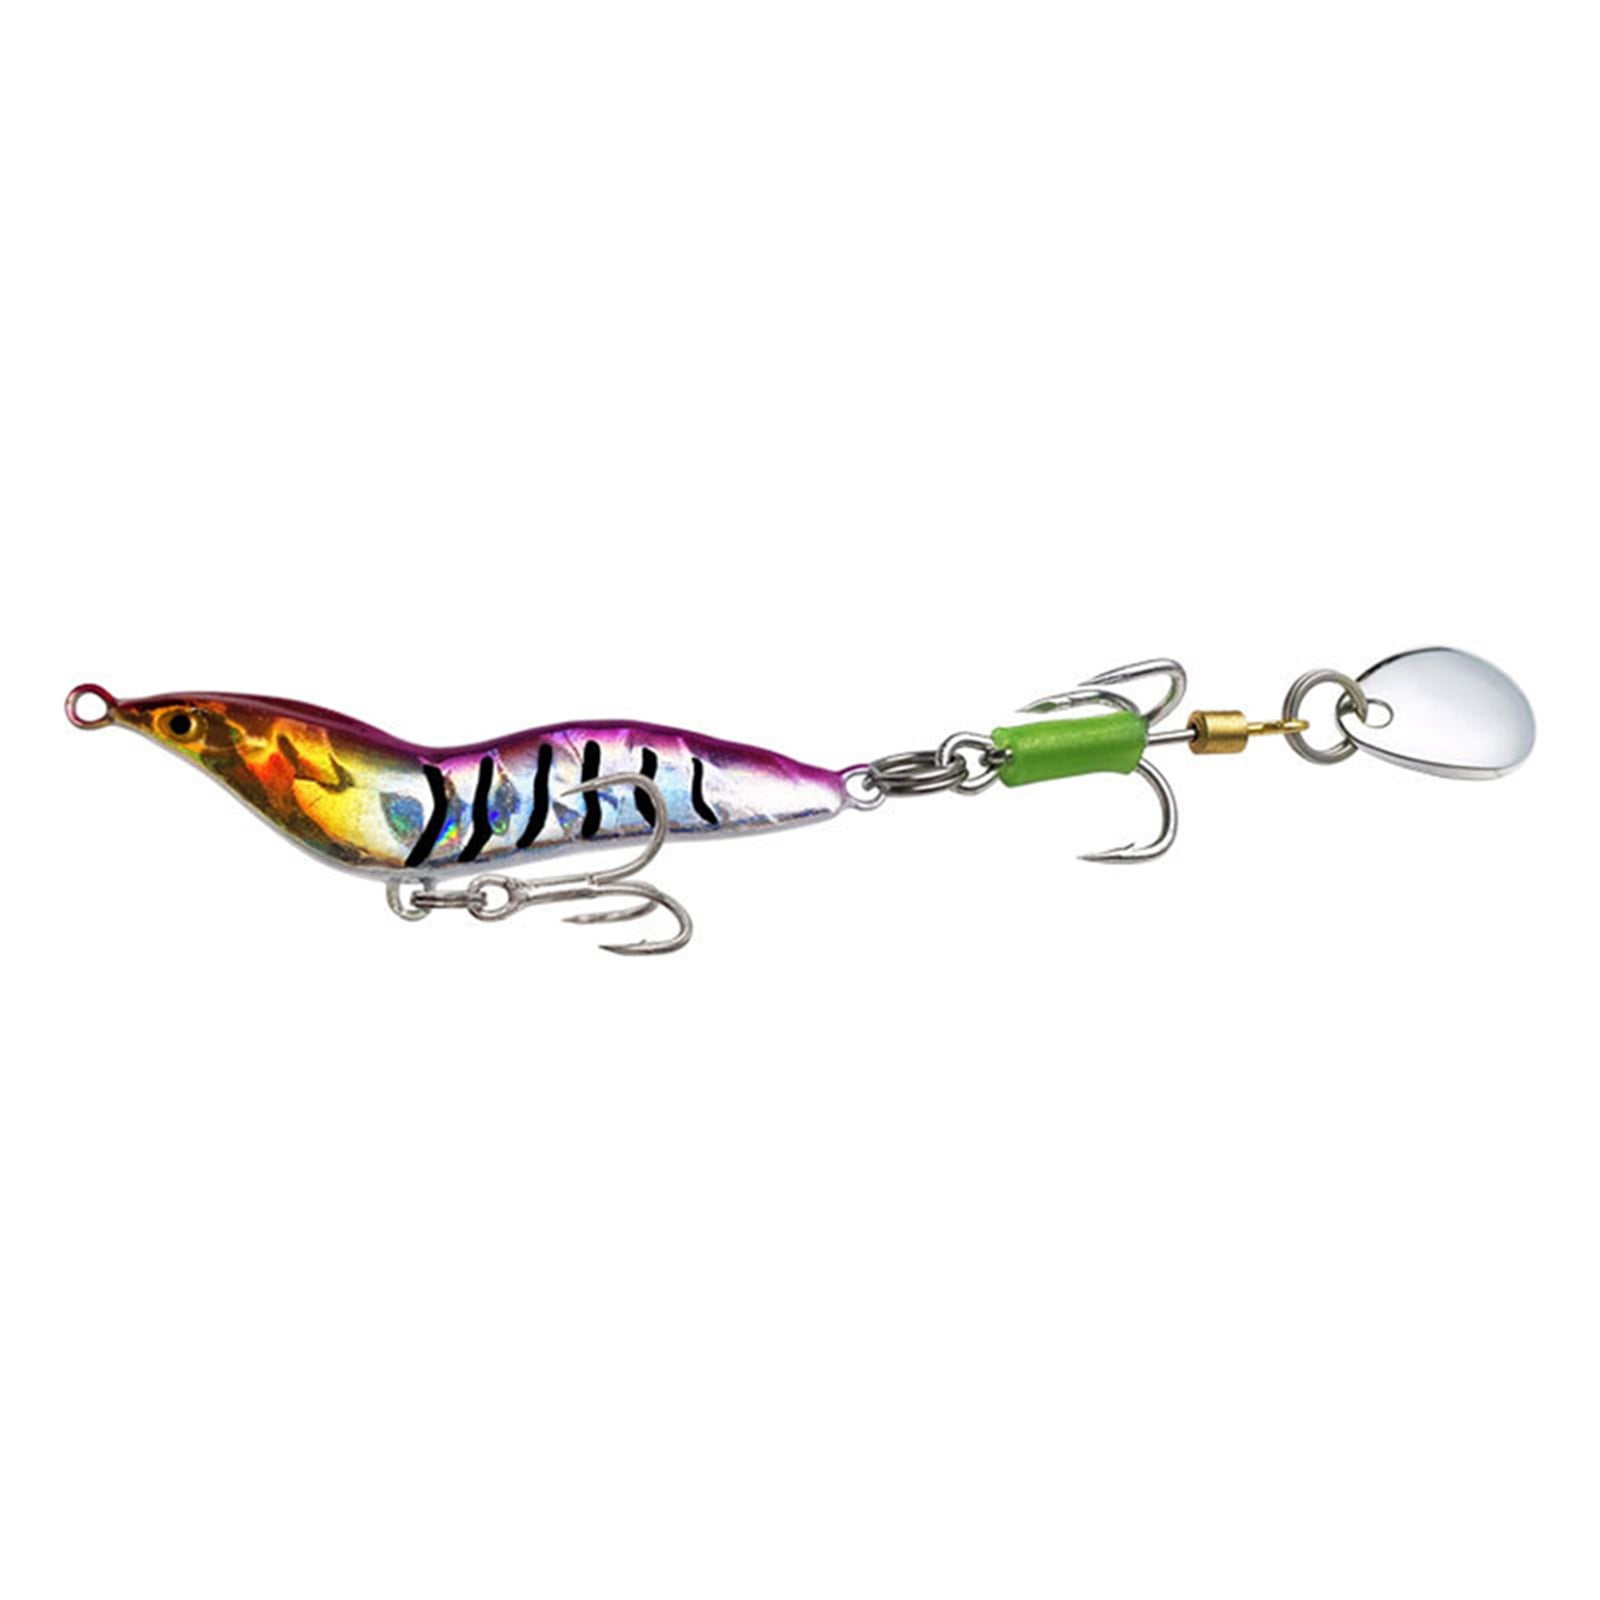 OROOTL Ned Rig Jig Heads Kit, 25Pcs Crappie Jig Heads Finesse